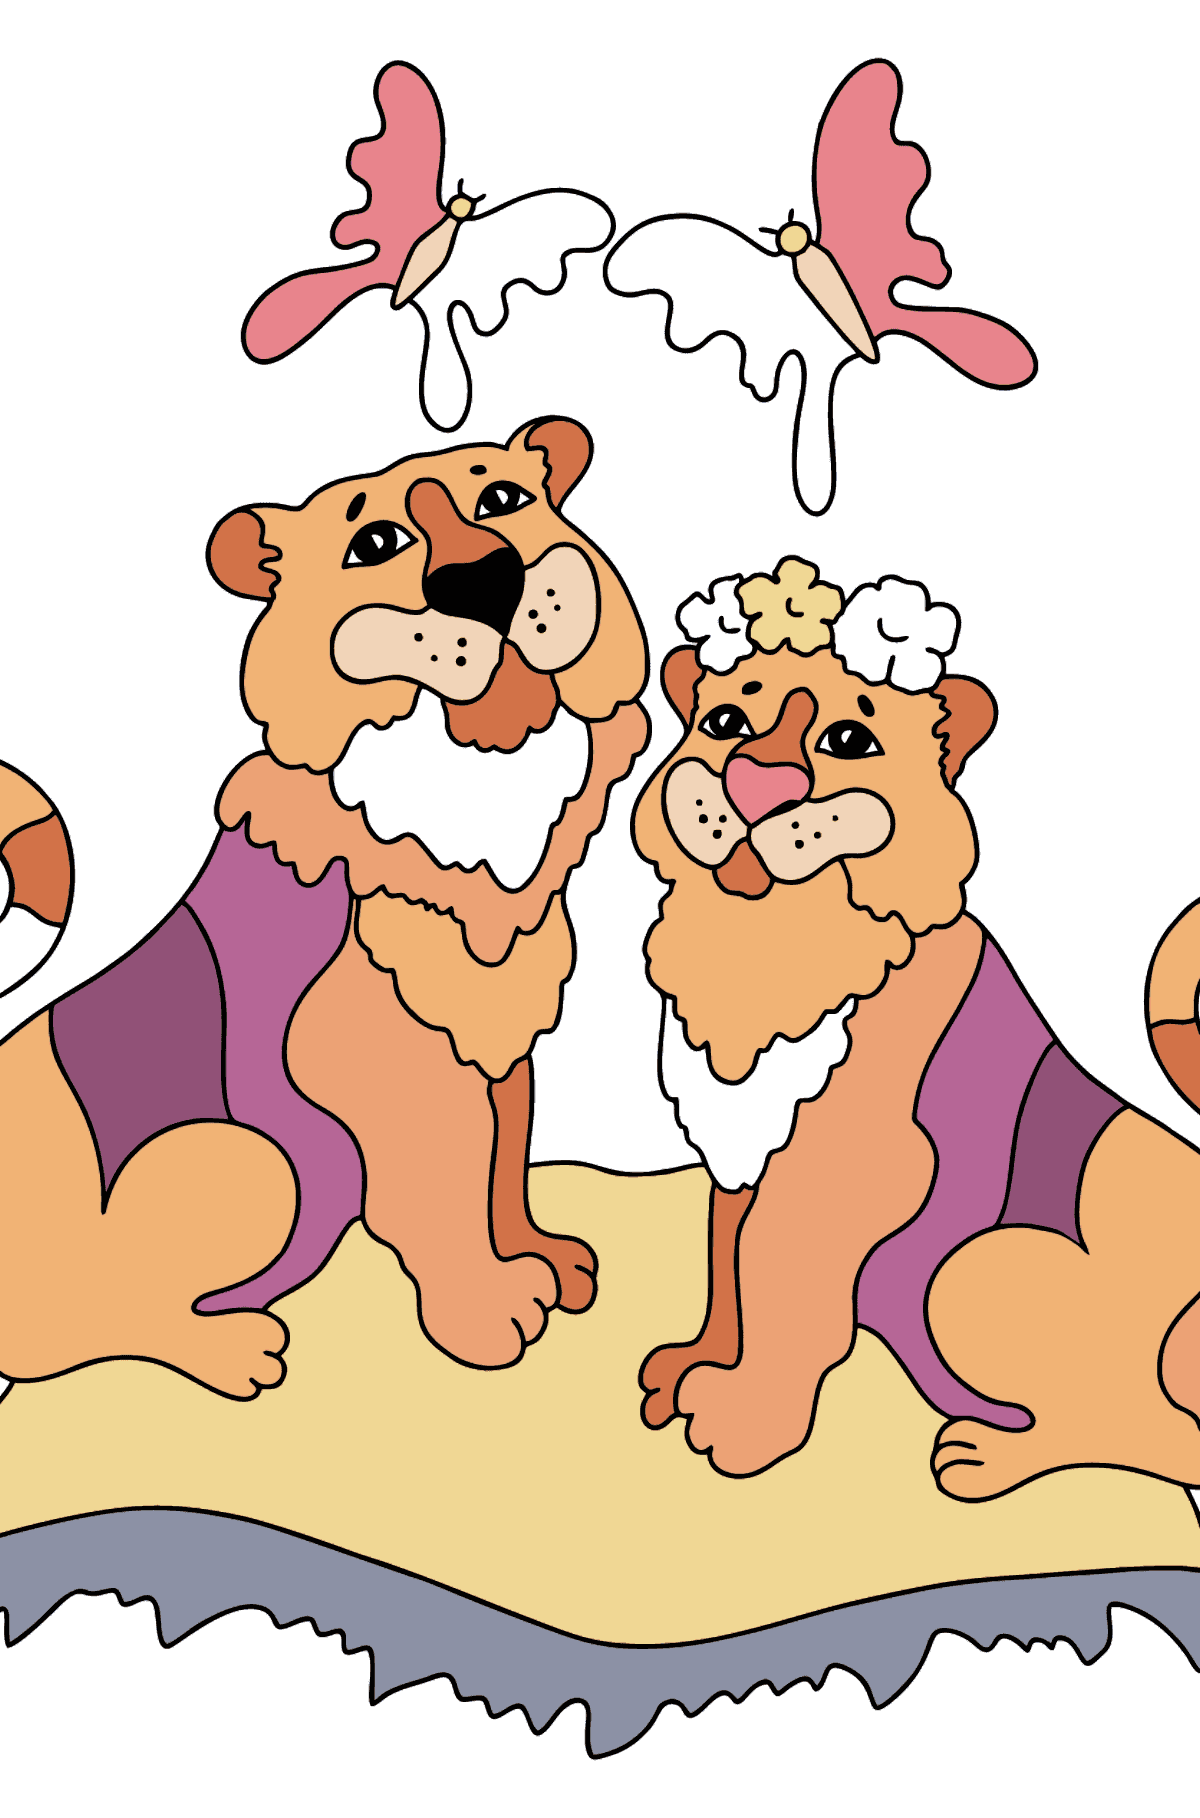 Coloring Page - Tigers on a Magic Carpet - Coloring Pages for Kids